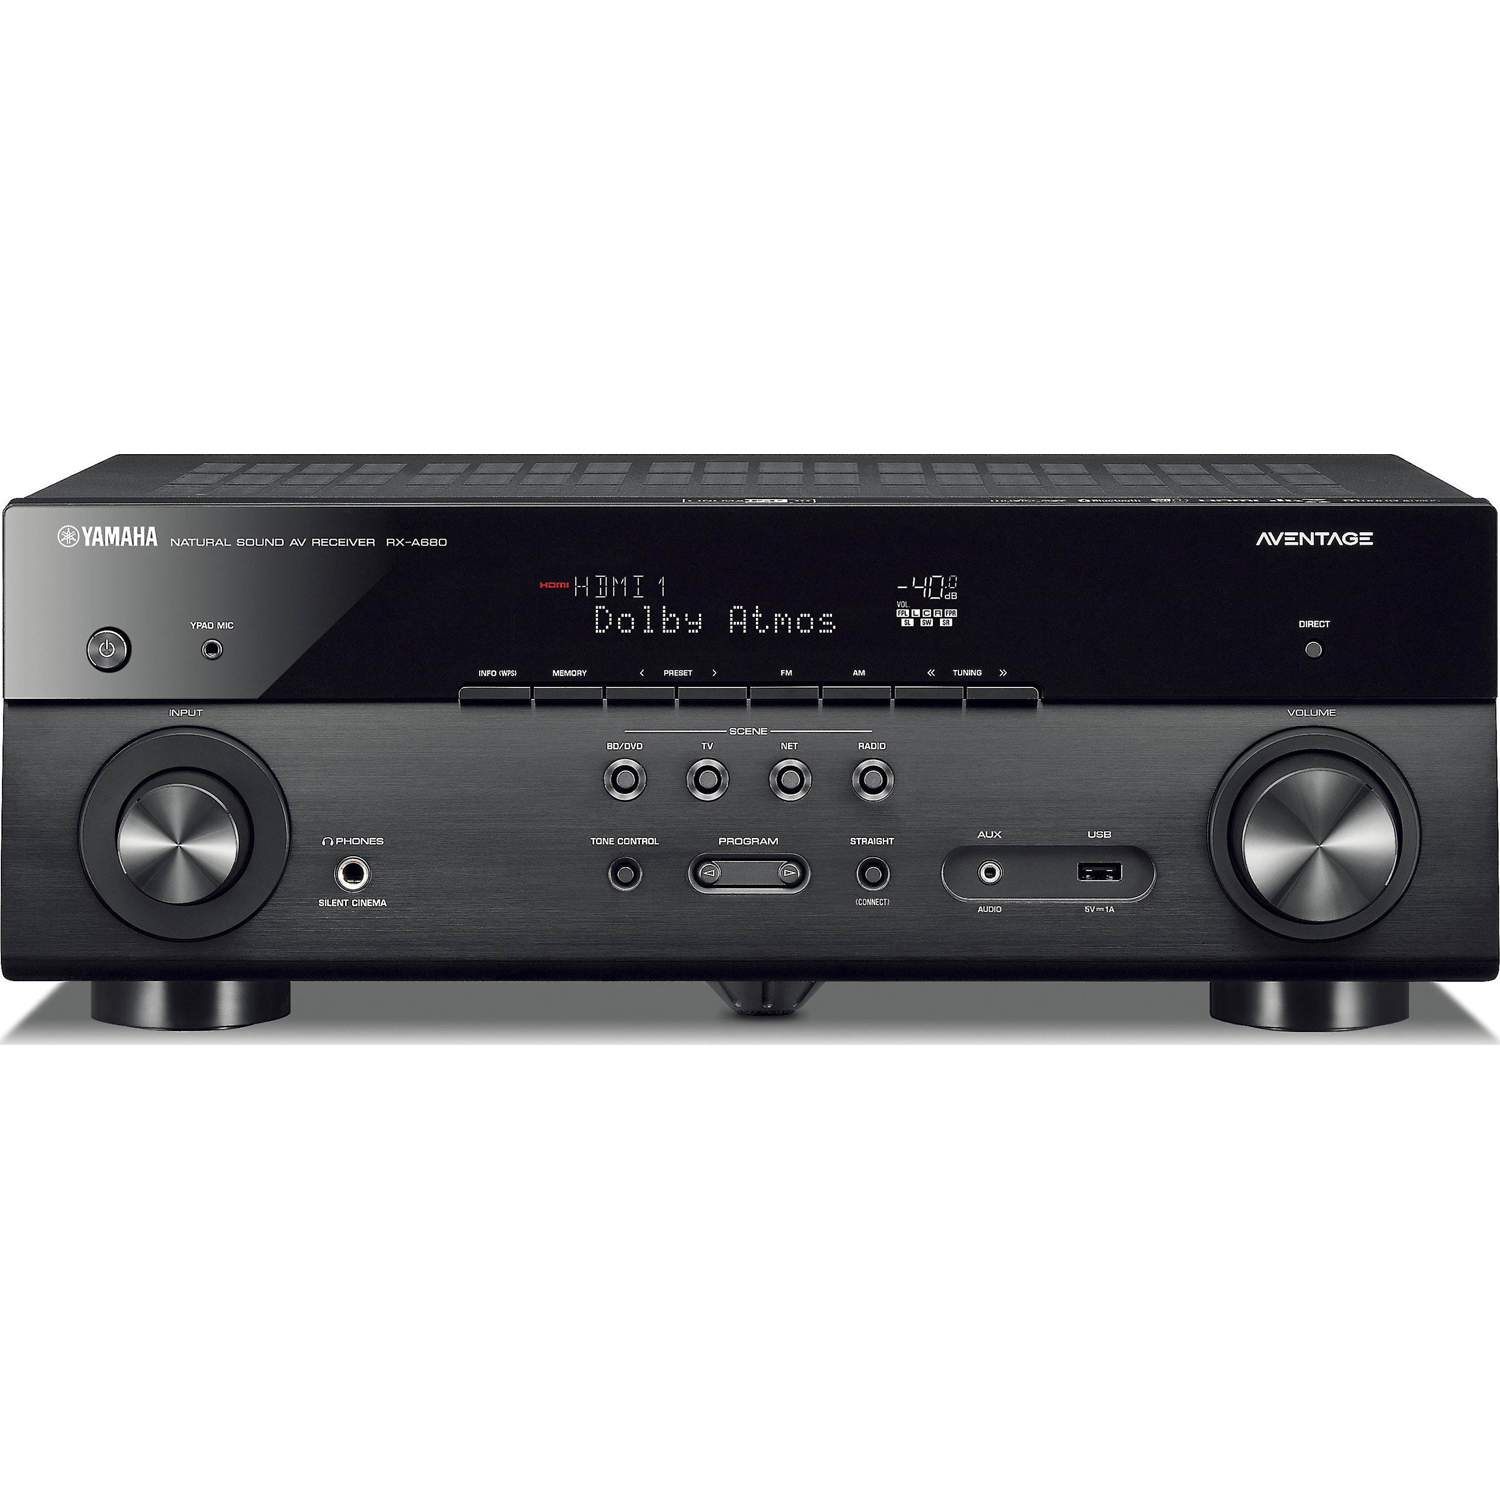 YAMAHA NEW RX-A680 7.2-Ch x 80 Watts Networking A/V Receiver 